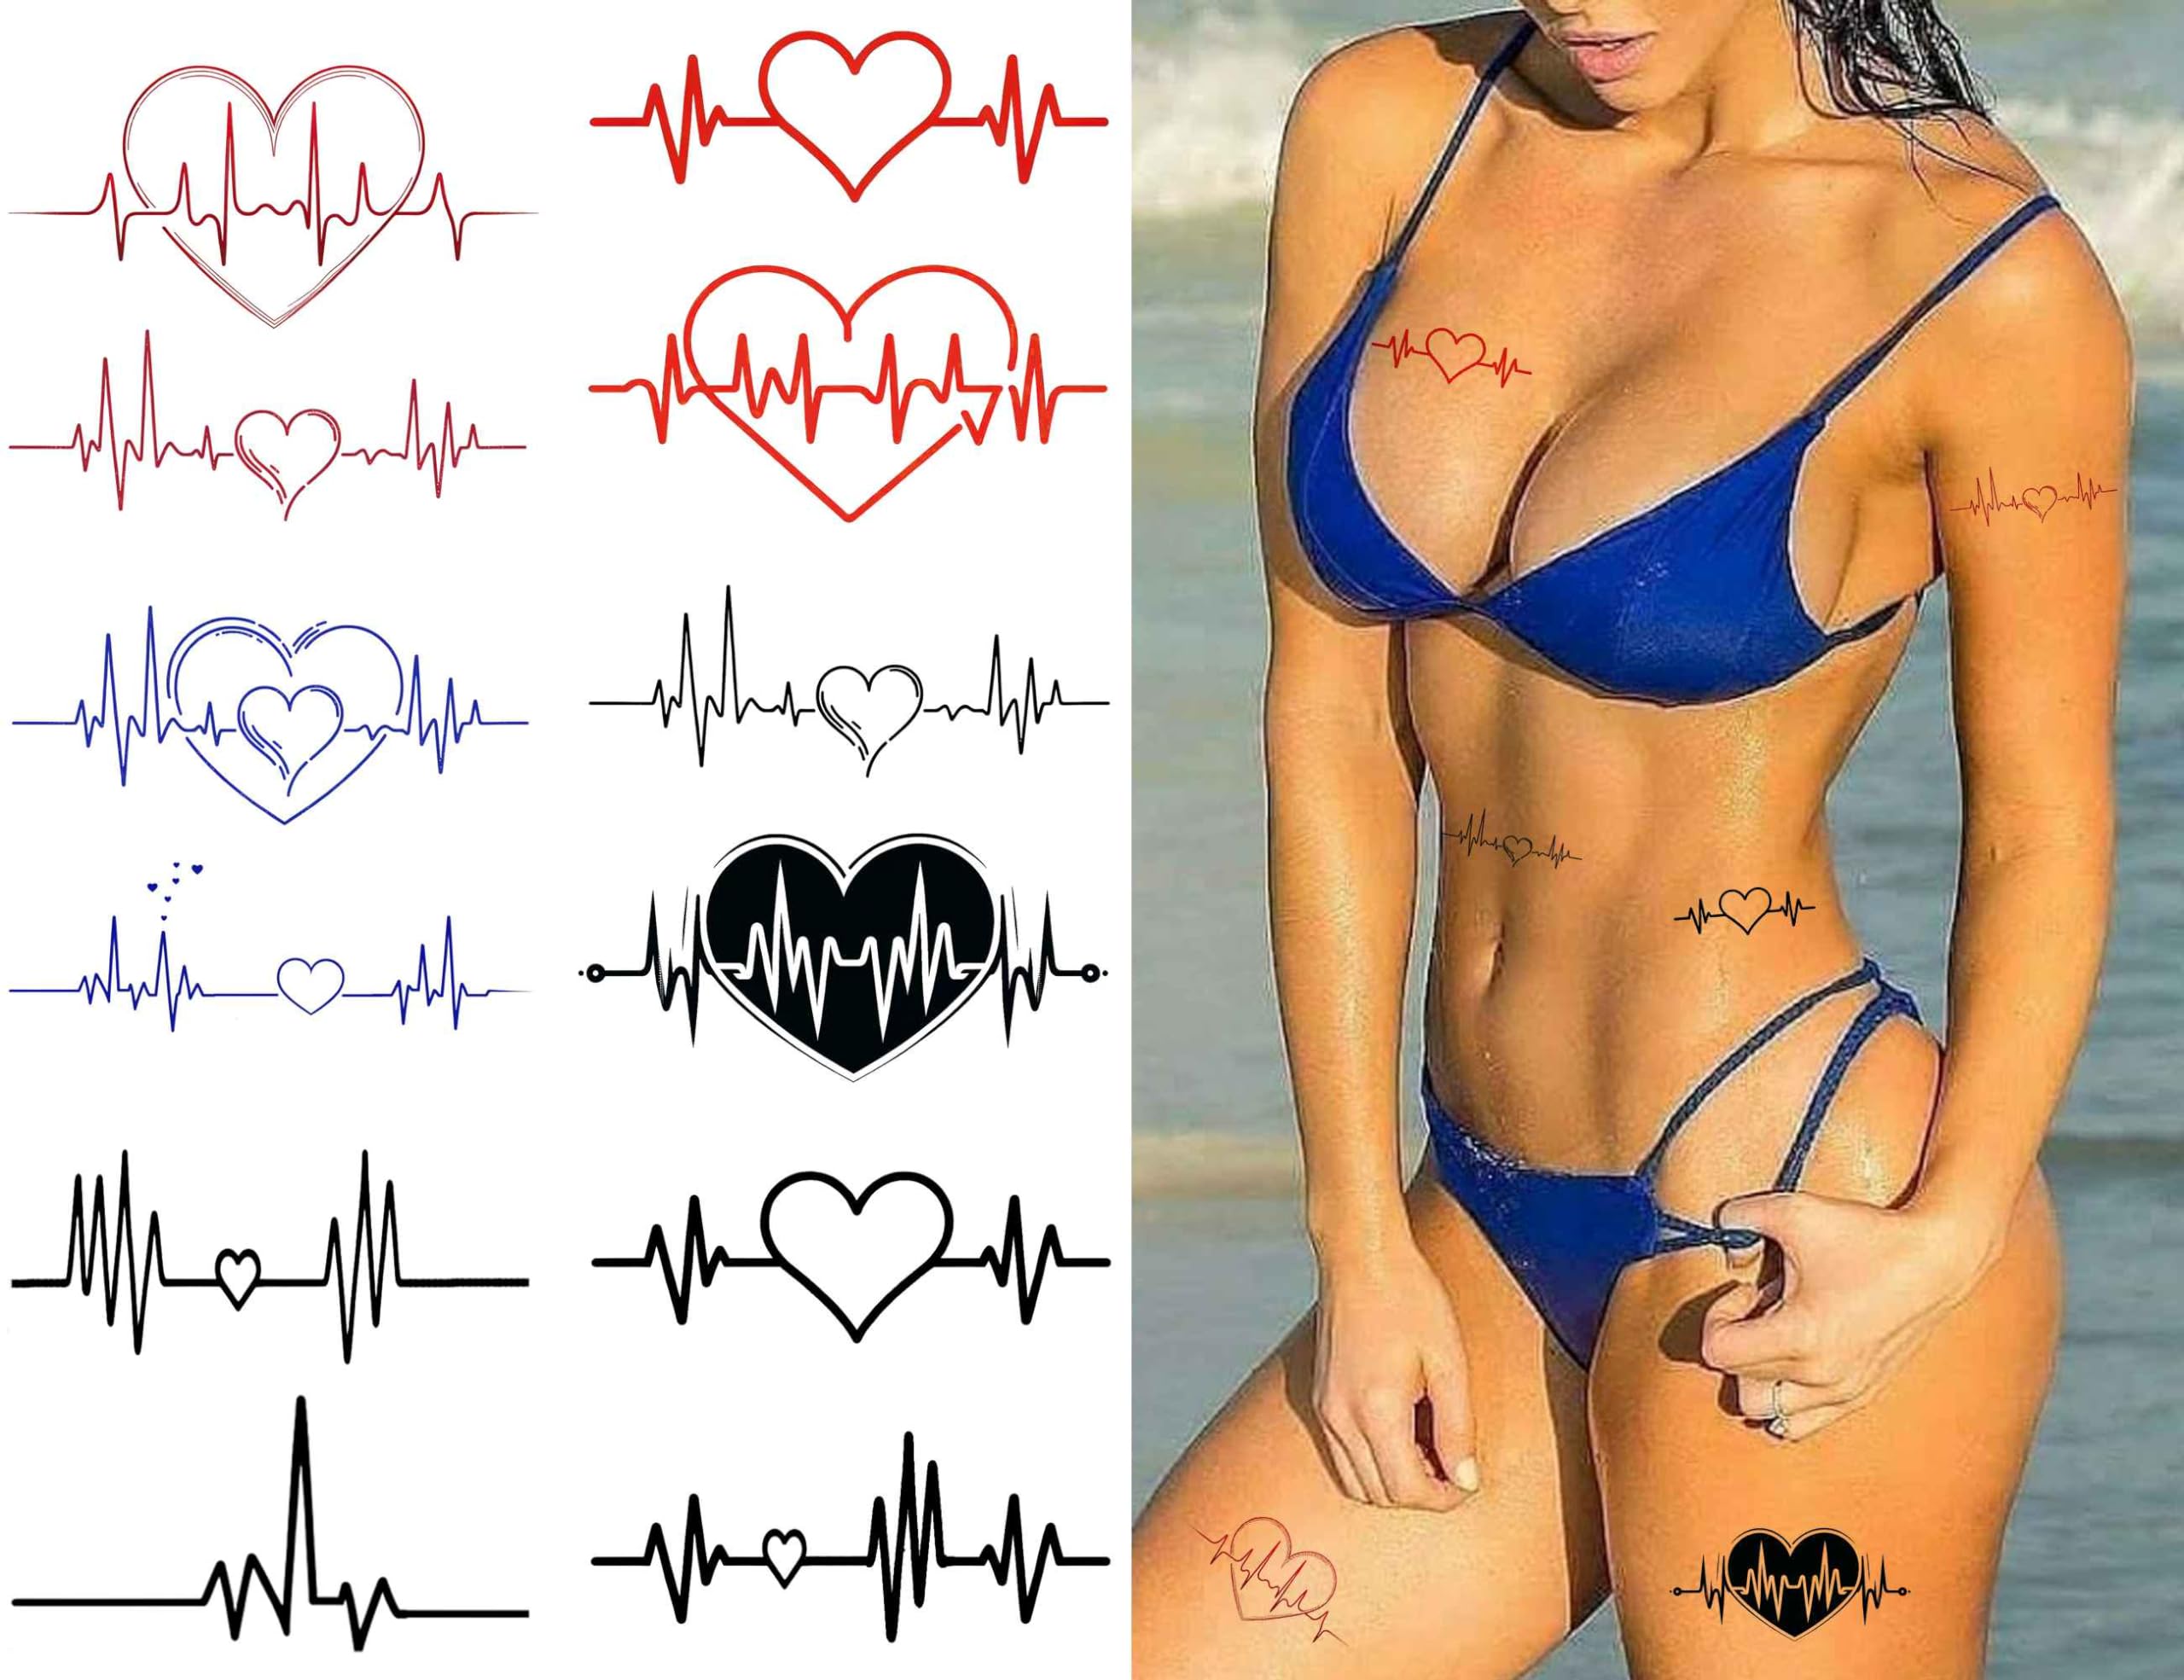 JCTATO 12 Designs Temporary Tattoo Heartbeat Tattoo Women Adults Valentines Day Party Favors Heart Face Sleeve Heartbeat Fake Tattoos Body Art Satickers